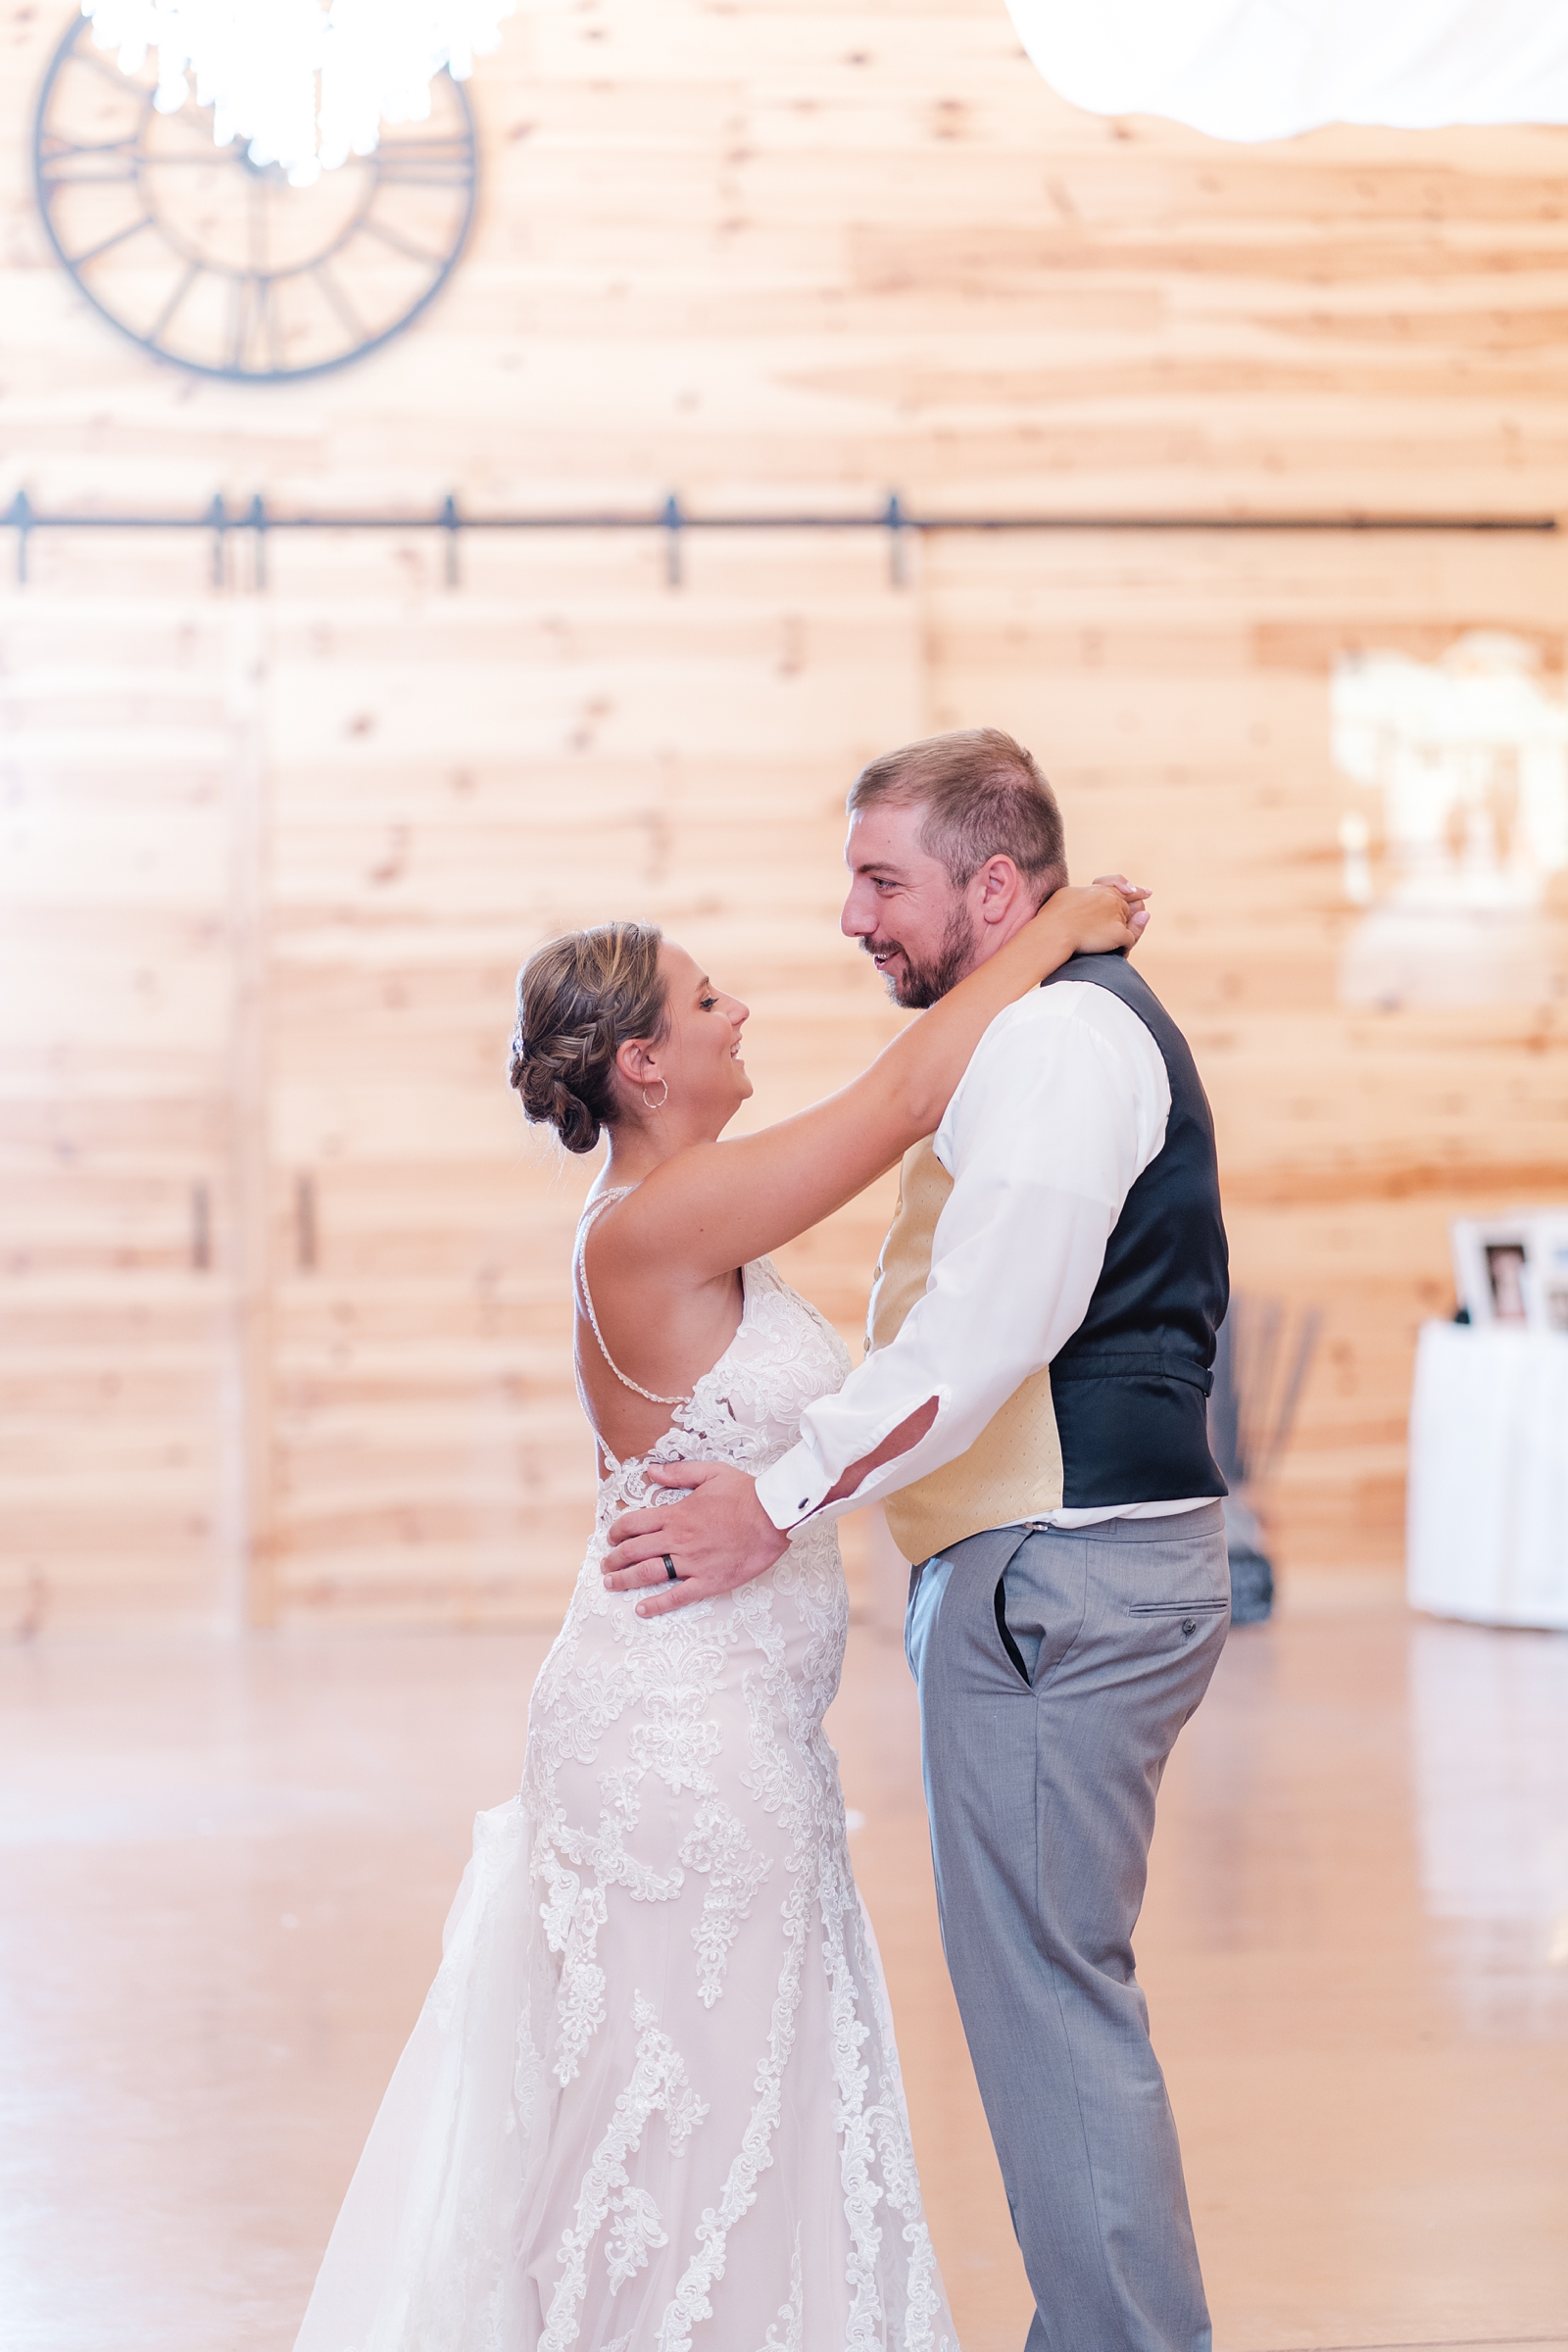 Reception at The Barn at All Occasions